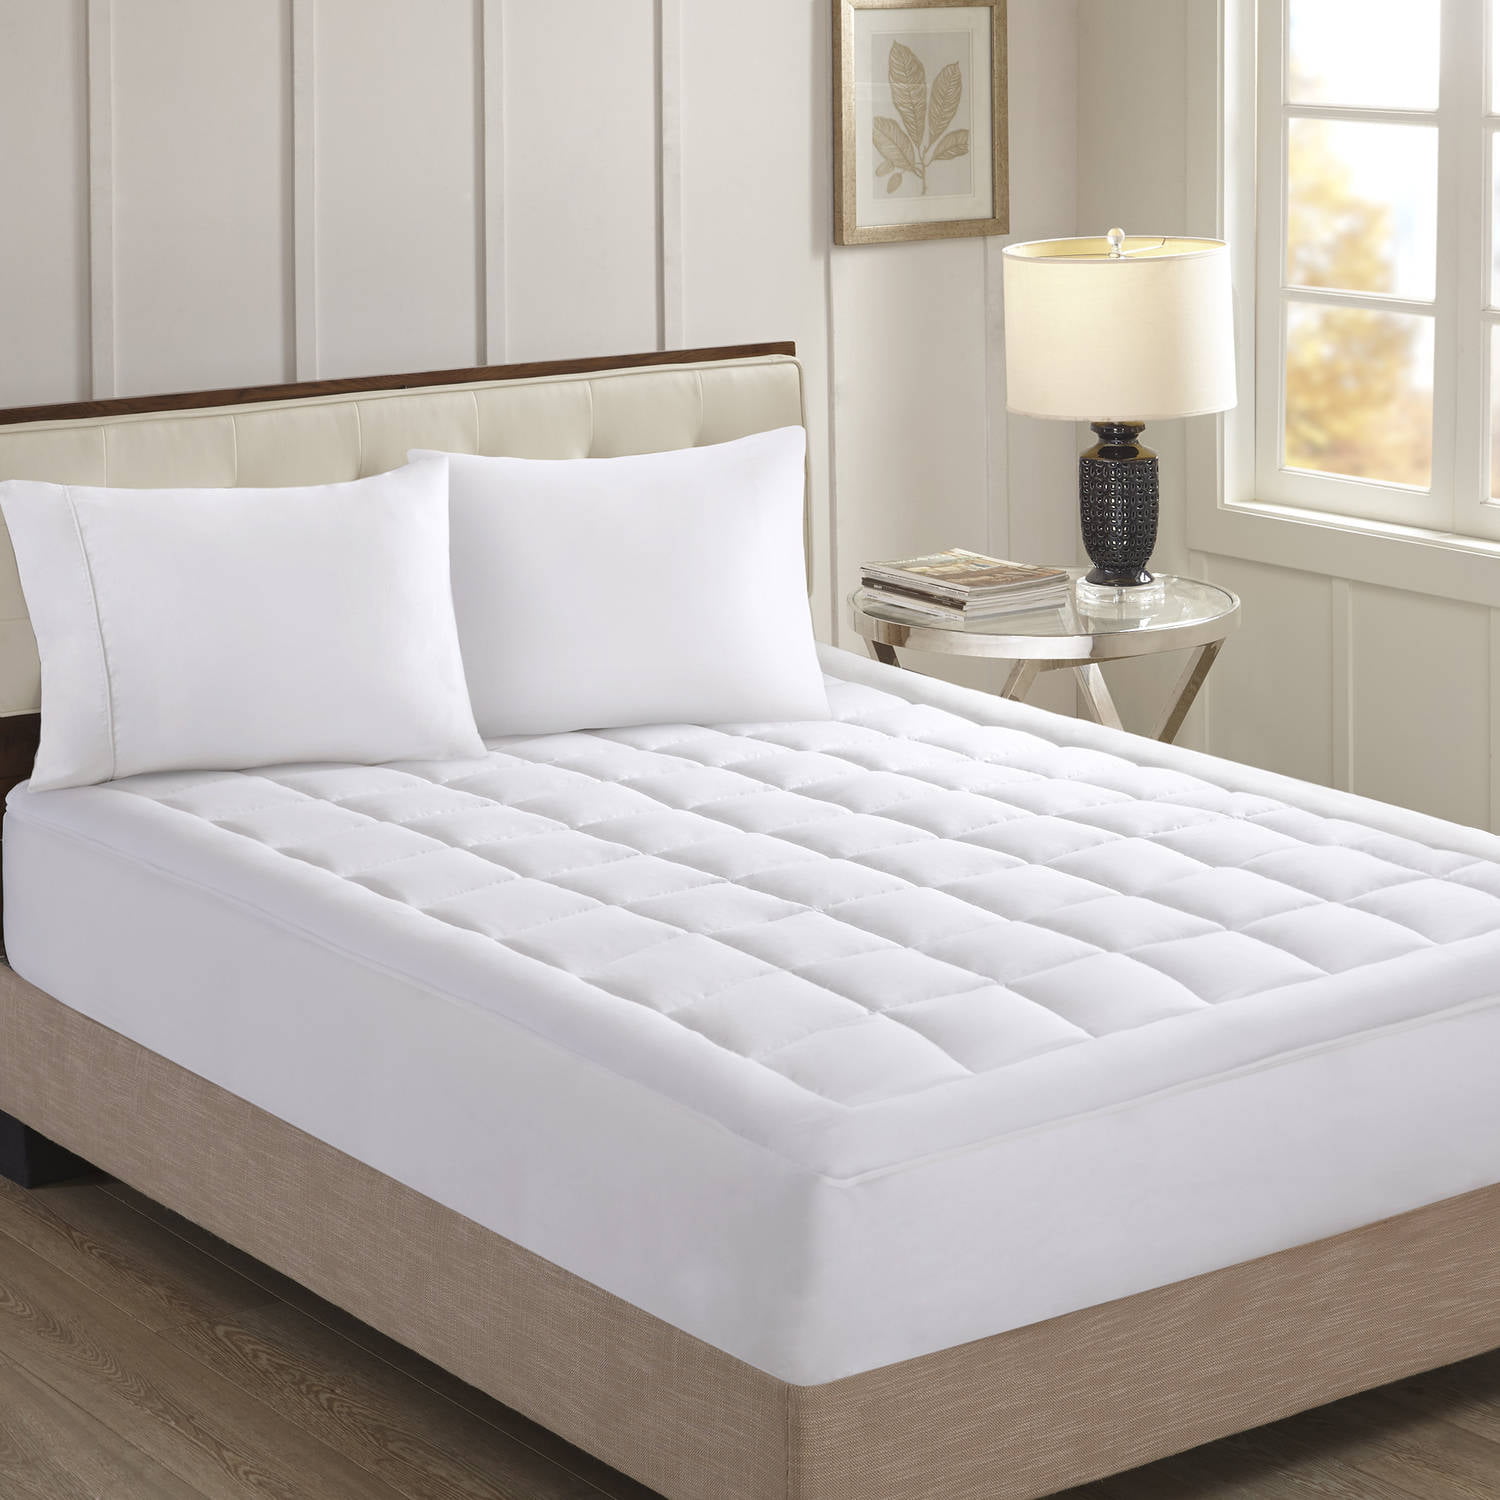 Sleep Philosophy All Natural Cotton/ Percale Quilted Mattress Pad with Spandex Snug-on Slip Fit Skirt White King BASI16-0329